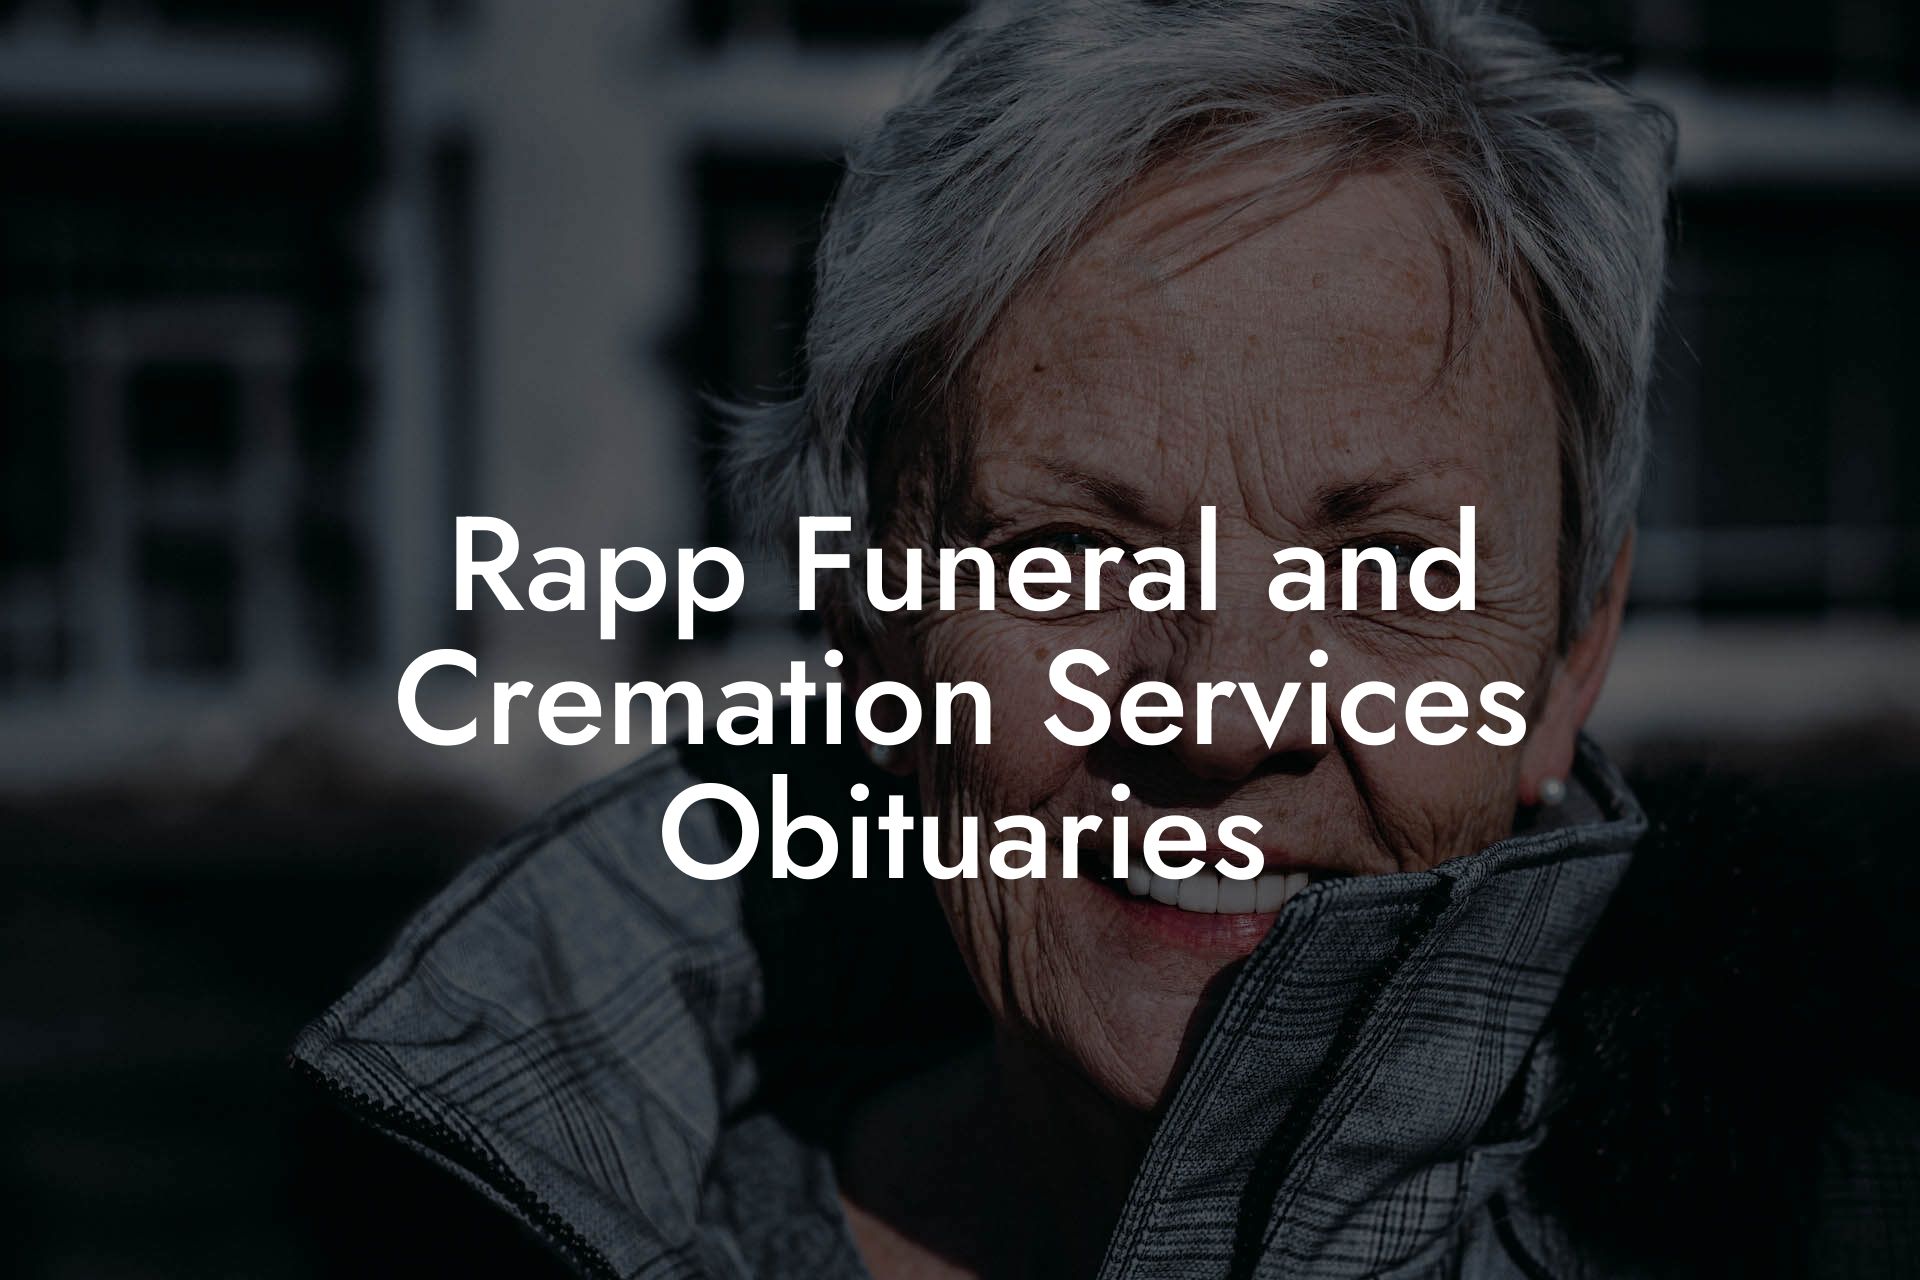 Rapp Funeral and Cremation Services Obituaries